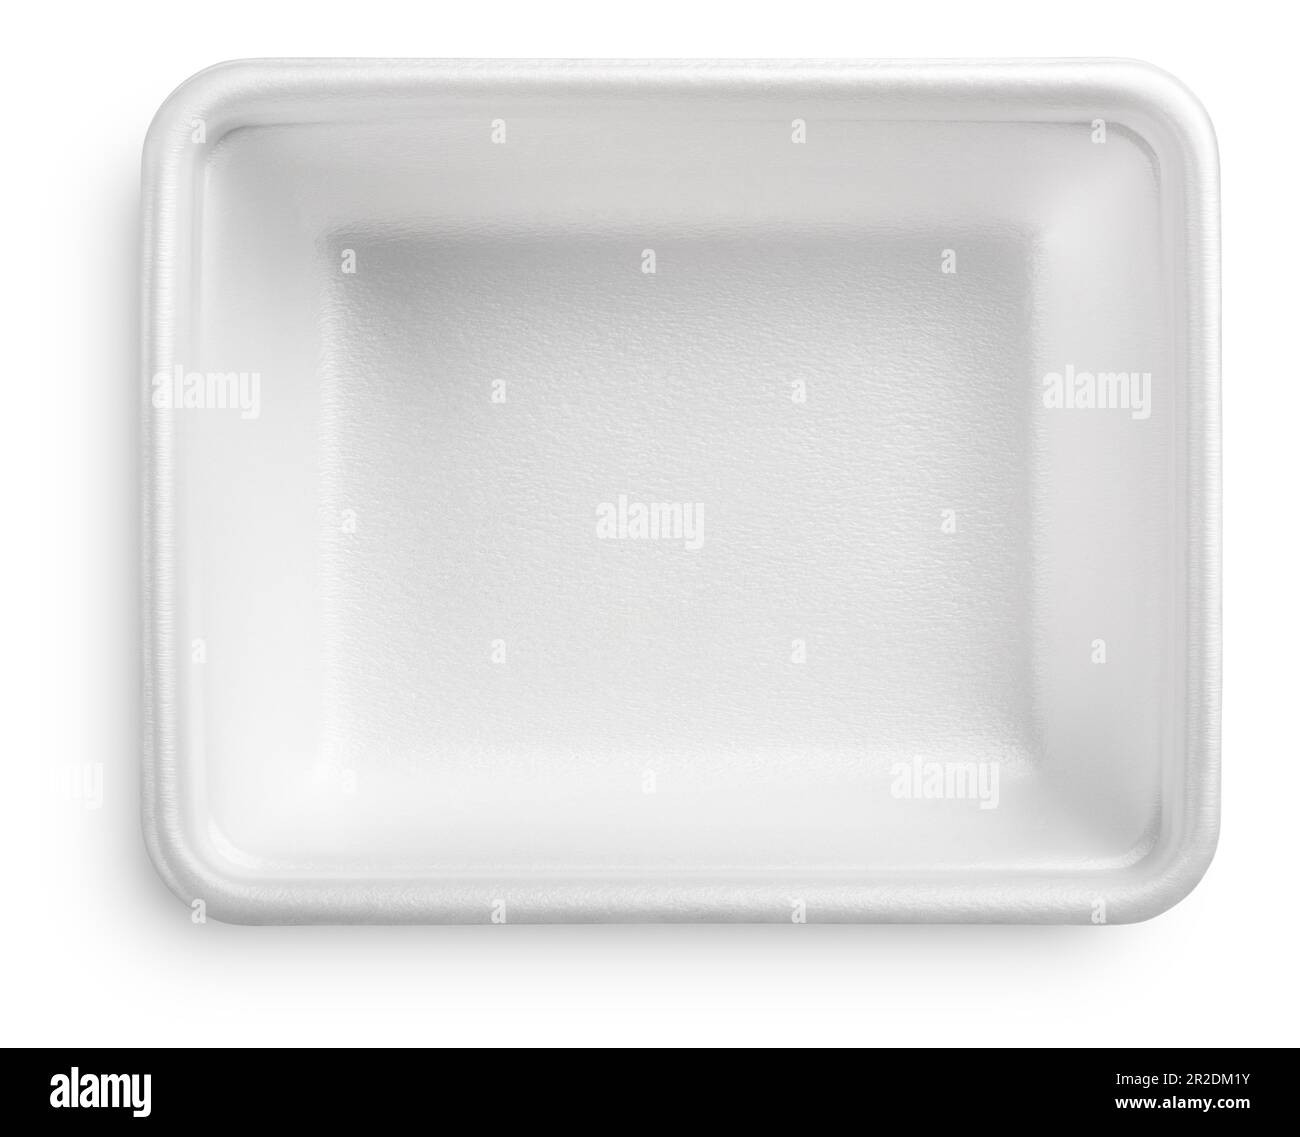 White plastic plate or styrofoam food container isolated on white background with clipping path Stock Photo